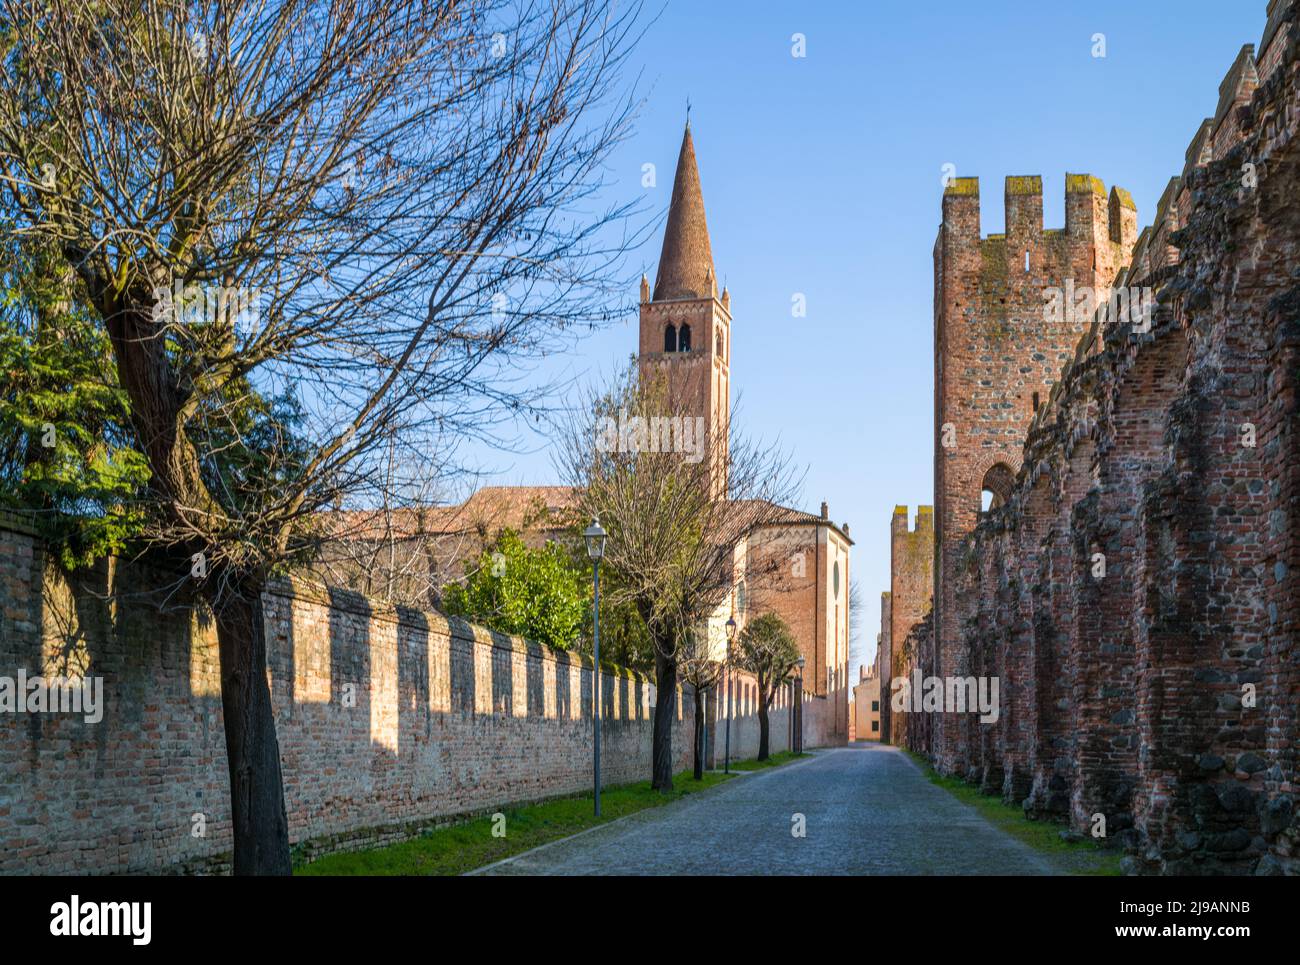 Italy, Montagnana, view of the church of San Francesco located in front of the medieval walls Stock Photo